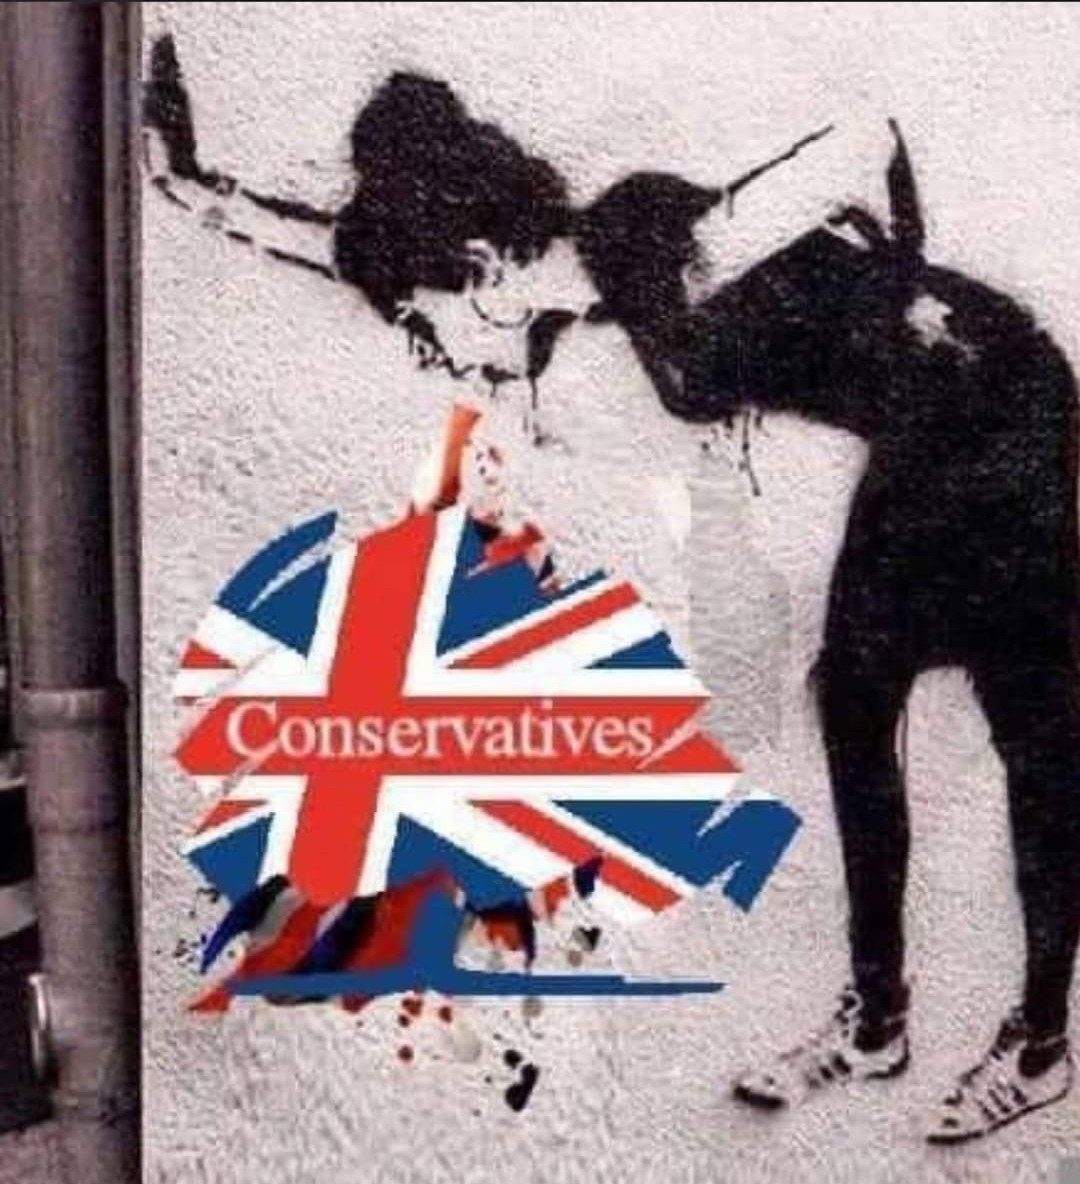 If ur sick and tired of the lying, cheating, corrupt, grifting, utter shitshow of this Tory Govt then do drop me a follow. Under these cretins, this country is a complete joke. Surely it can't last too much longer......can it?!?! #followbackfriday #EnoughlsEnough #fuckthetories